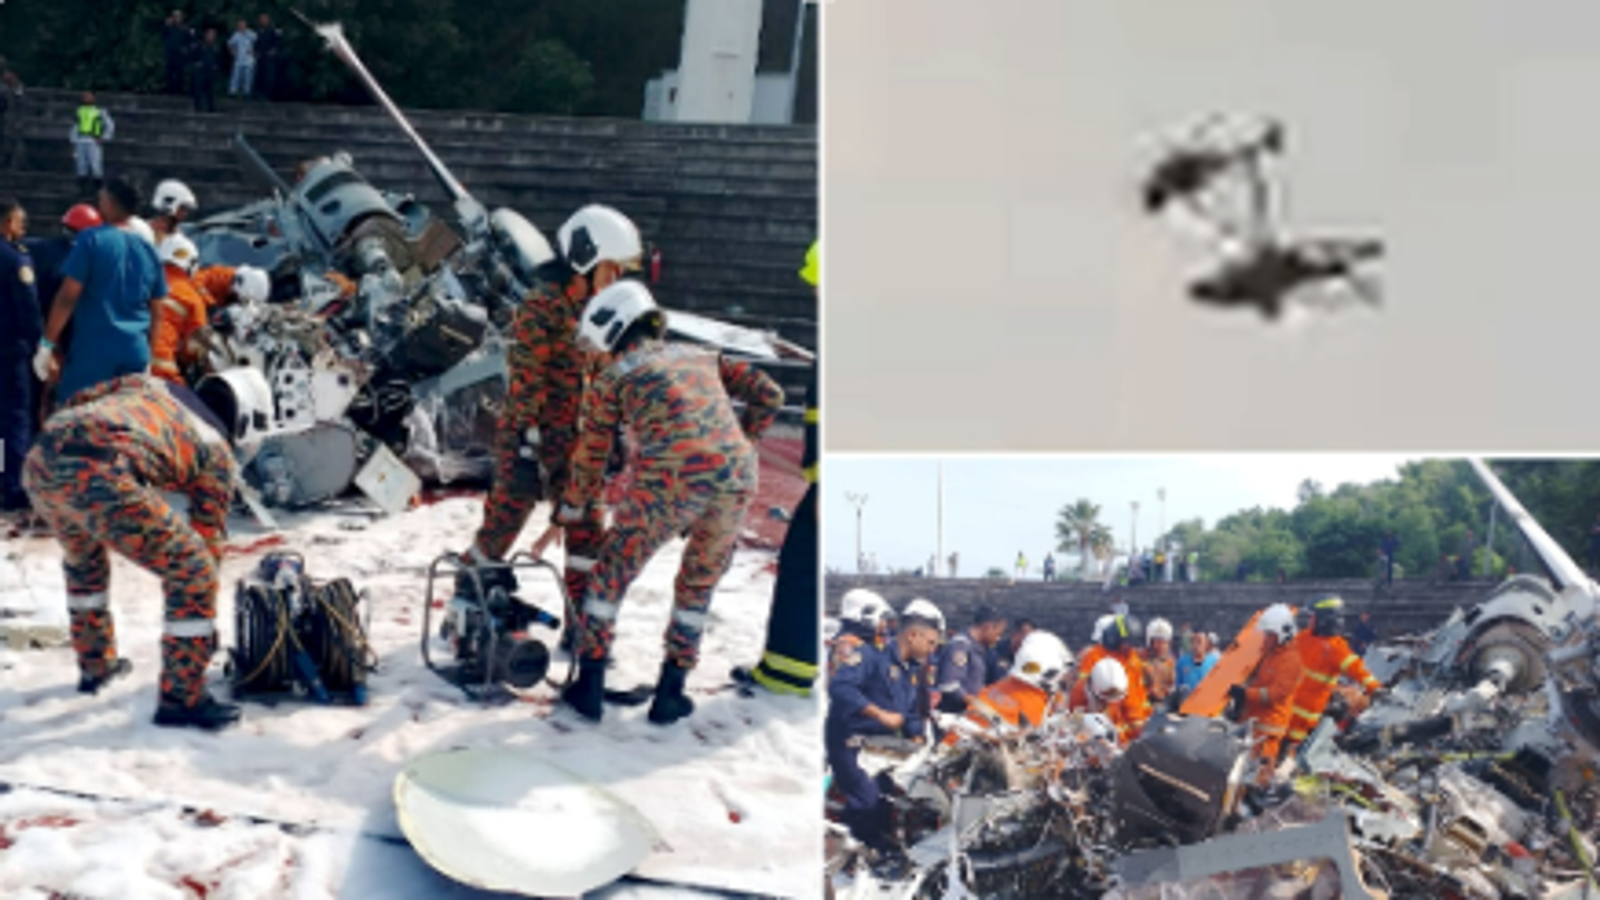 Two Malaysian Navy Helicopters Collide in Mid-Air During Rehearsal, Killing All 10 Crew Members